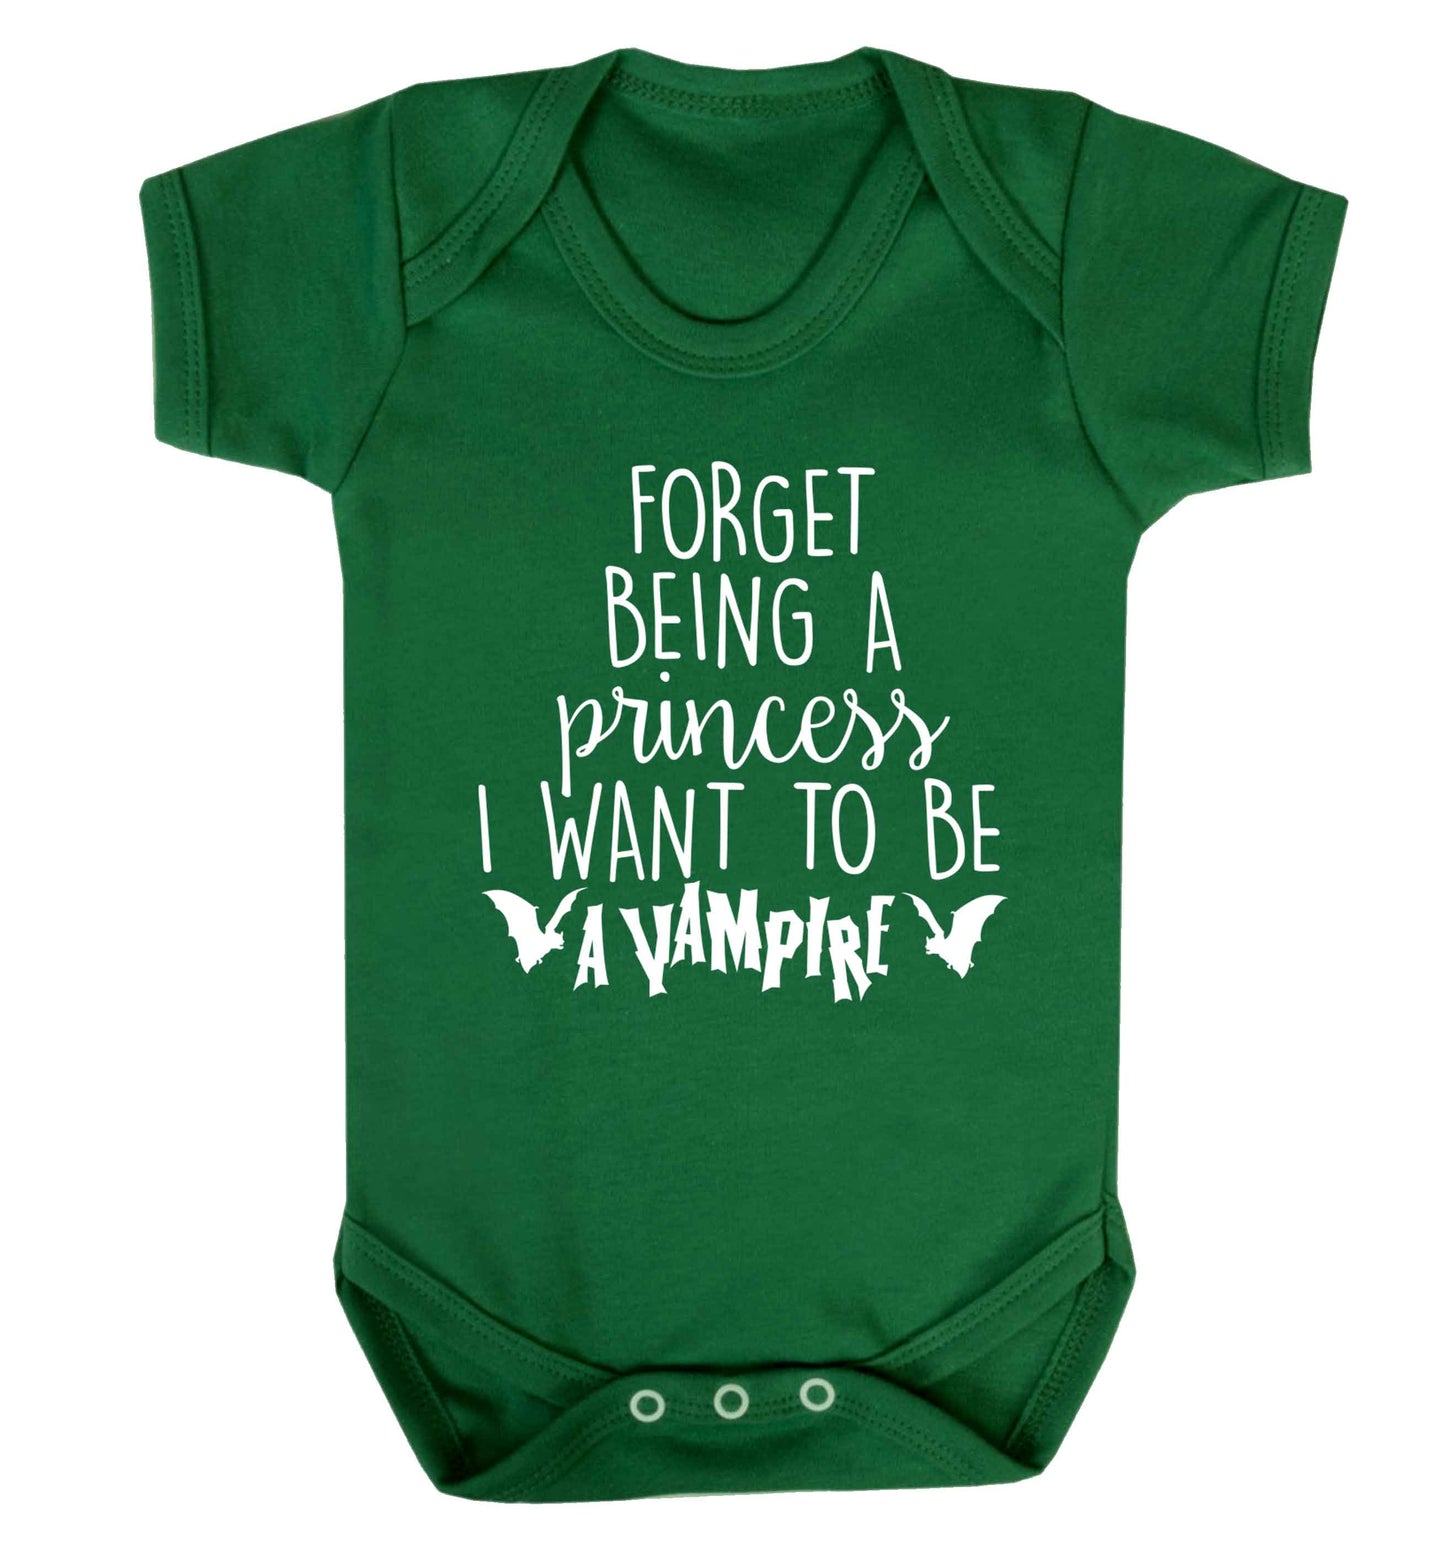 Forget being a princess I want to be a vampire Baby Vest green 18-24 months